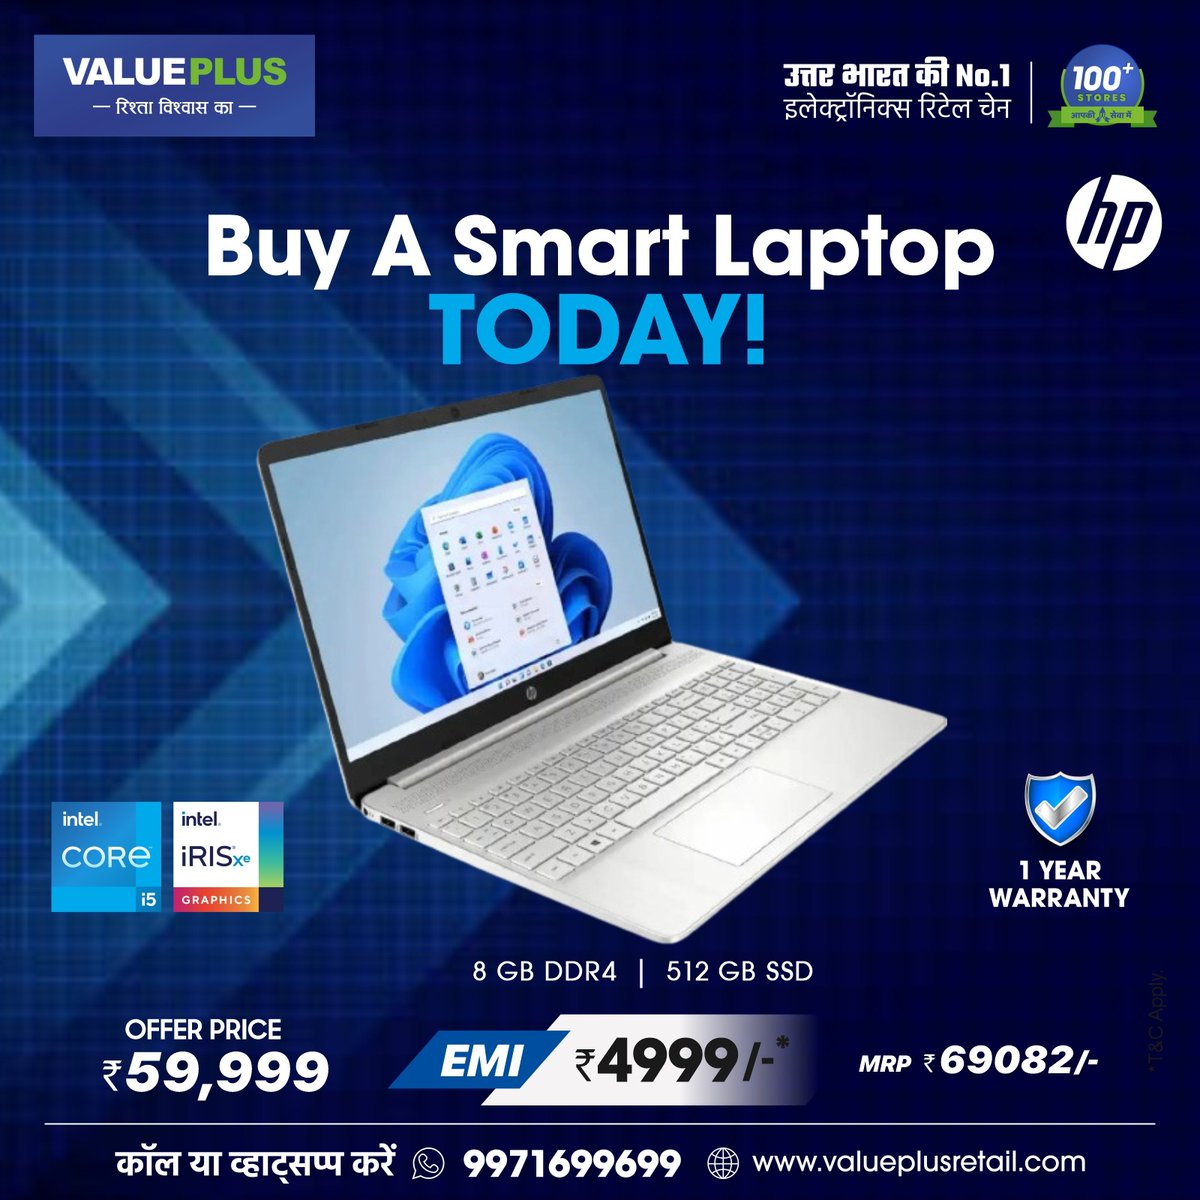 This HP Laptop is the perfect choice for: 😎💥

☑ Students
☑ Professionals
☑ Content Creators 
☑ Everyday Users

Don't forget to check out our incredible offers

Call 9971699699 and speak to our experts!
Visit valueplusretail.com
T&C Apply.

#Valueplus #hplaptop